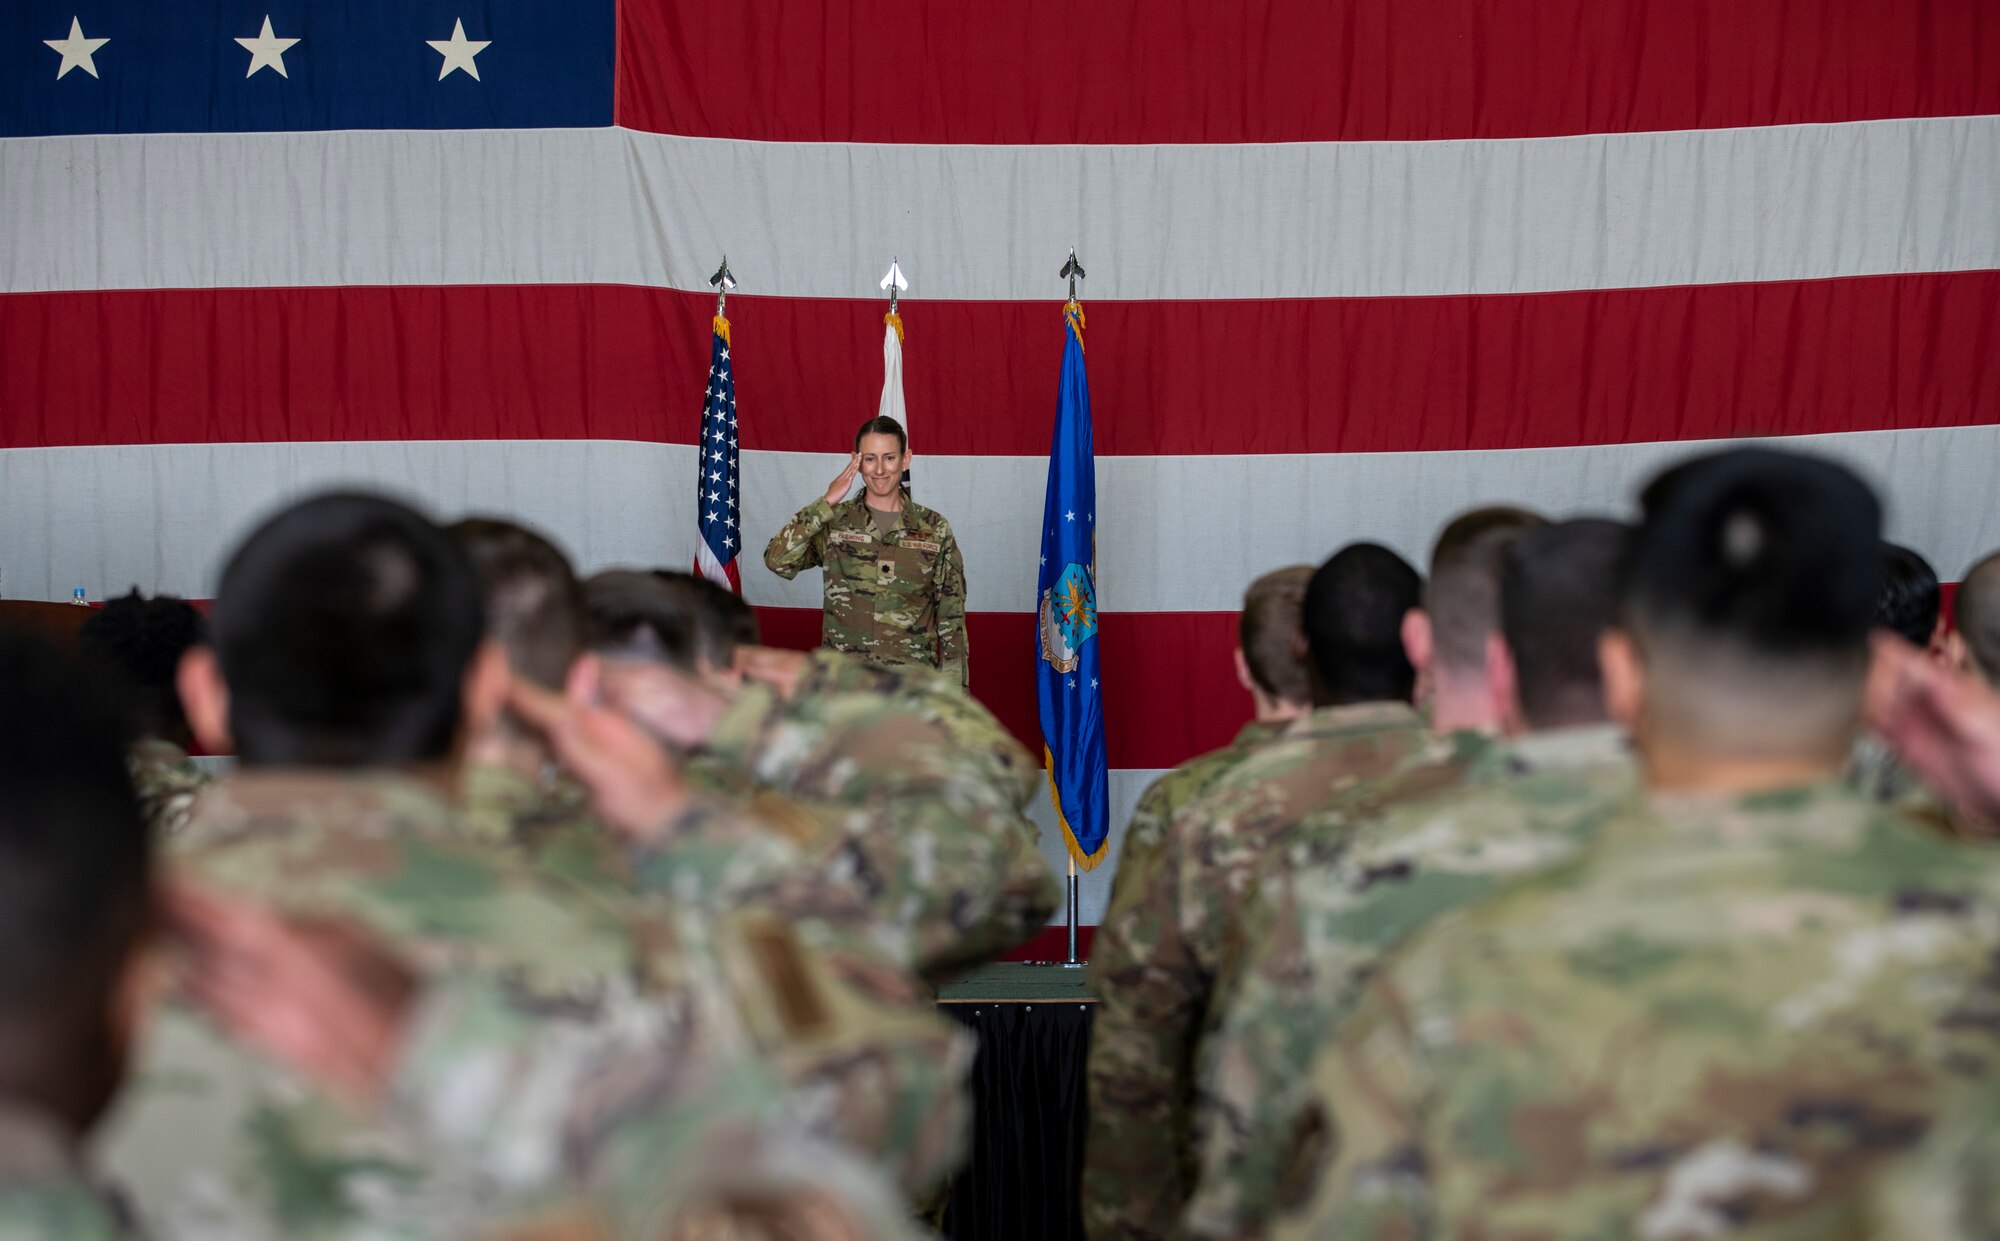 Lt. Col. Chandra Fleming, 51st Operations Support Squadron newly-appointed commander, renders her first salute as the 51st OSS commander to her squadron at Osan Air Base, Republic of Korea, June 7, 2022.